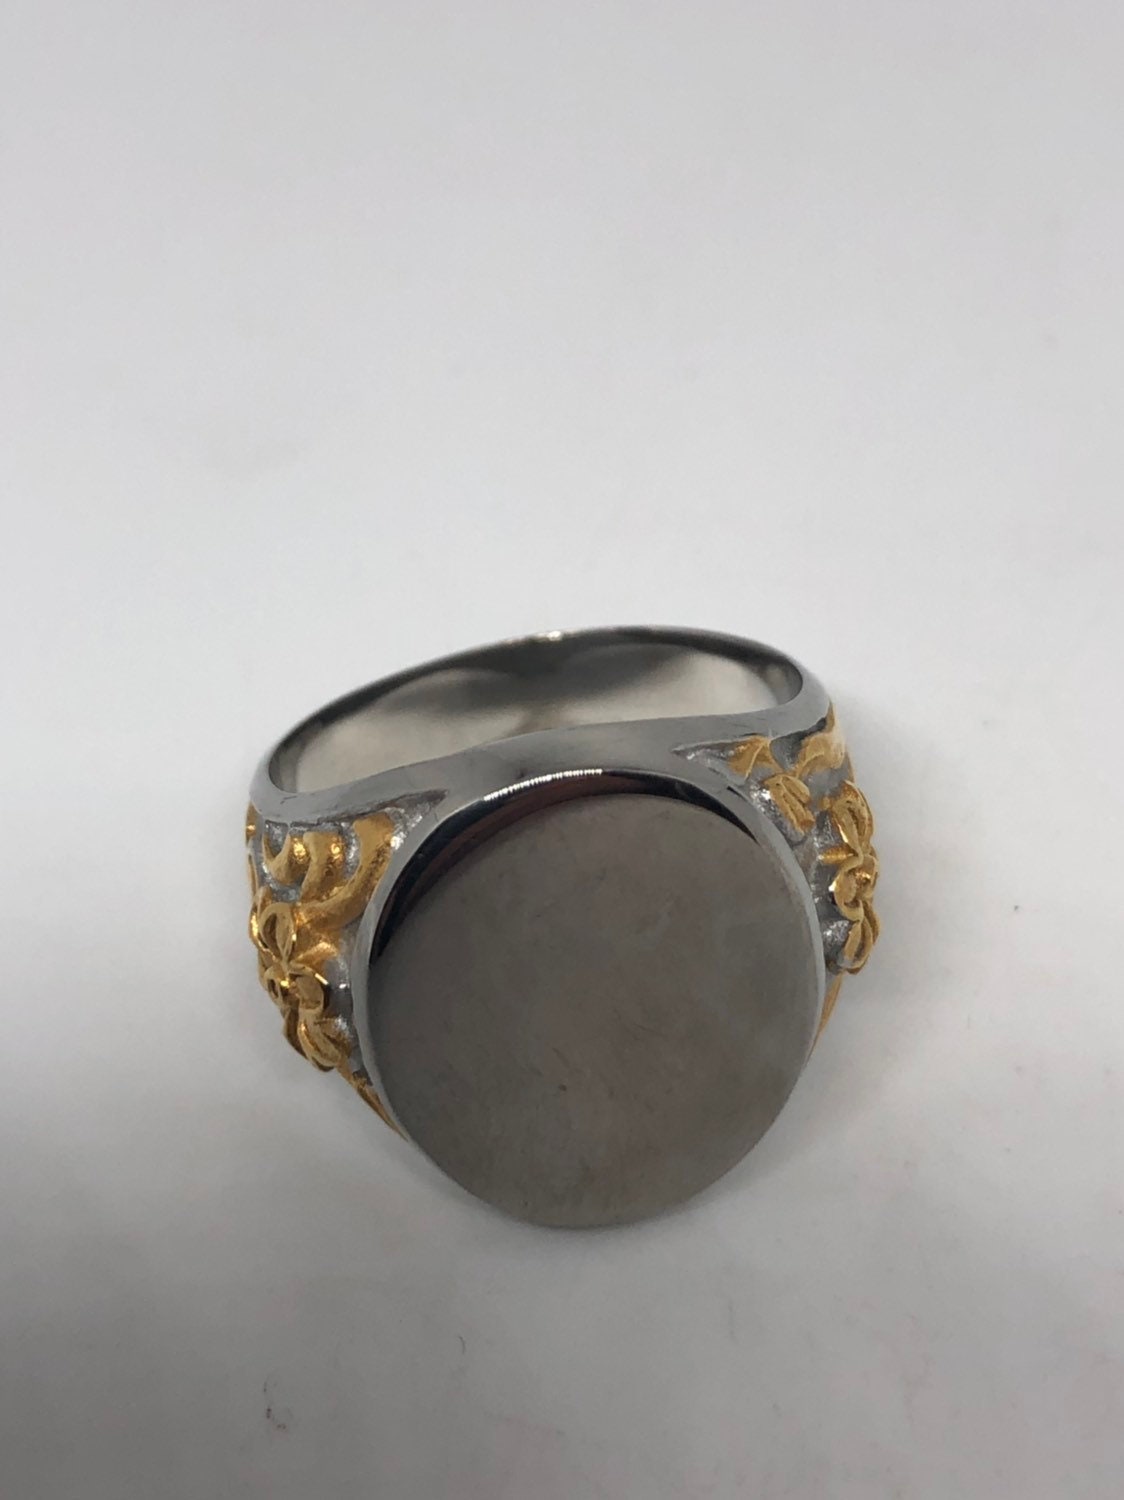 Vintage Silver and Gold Stainless Steel Momgram Engravable Mens Ring